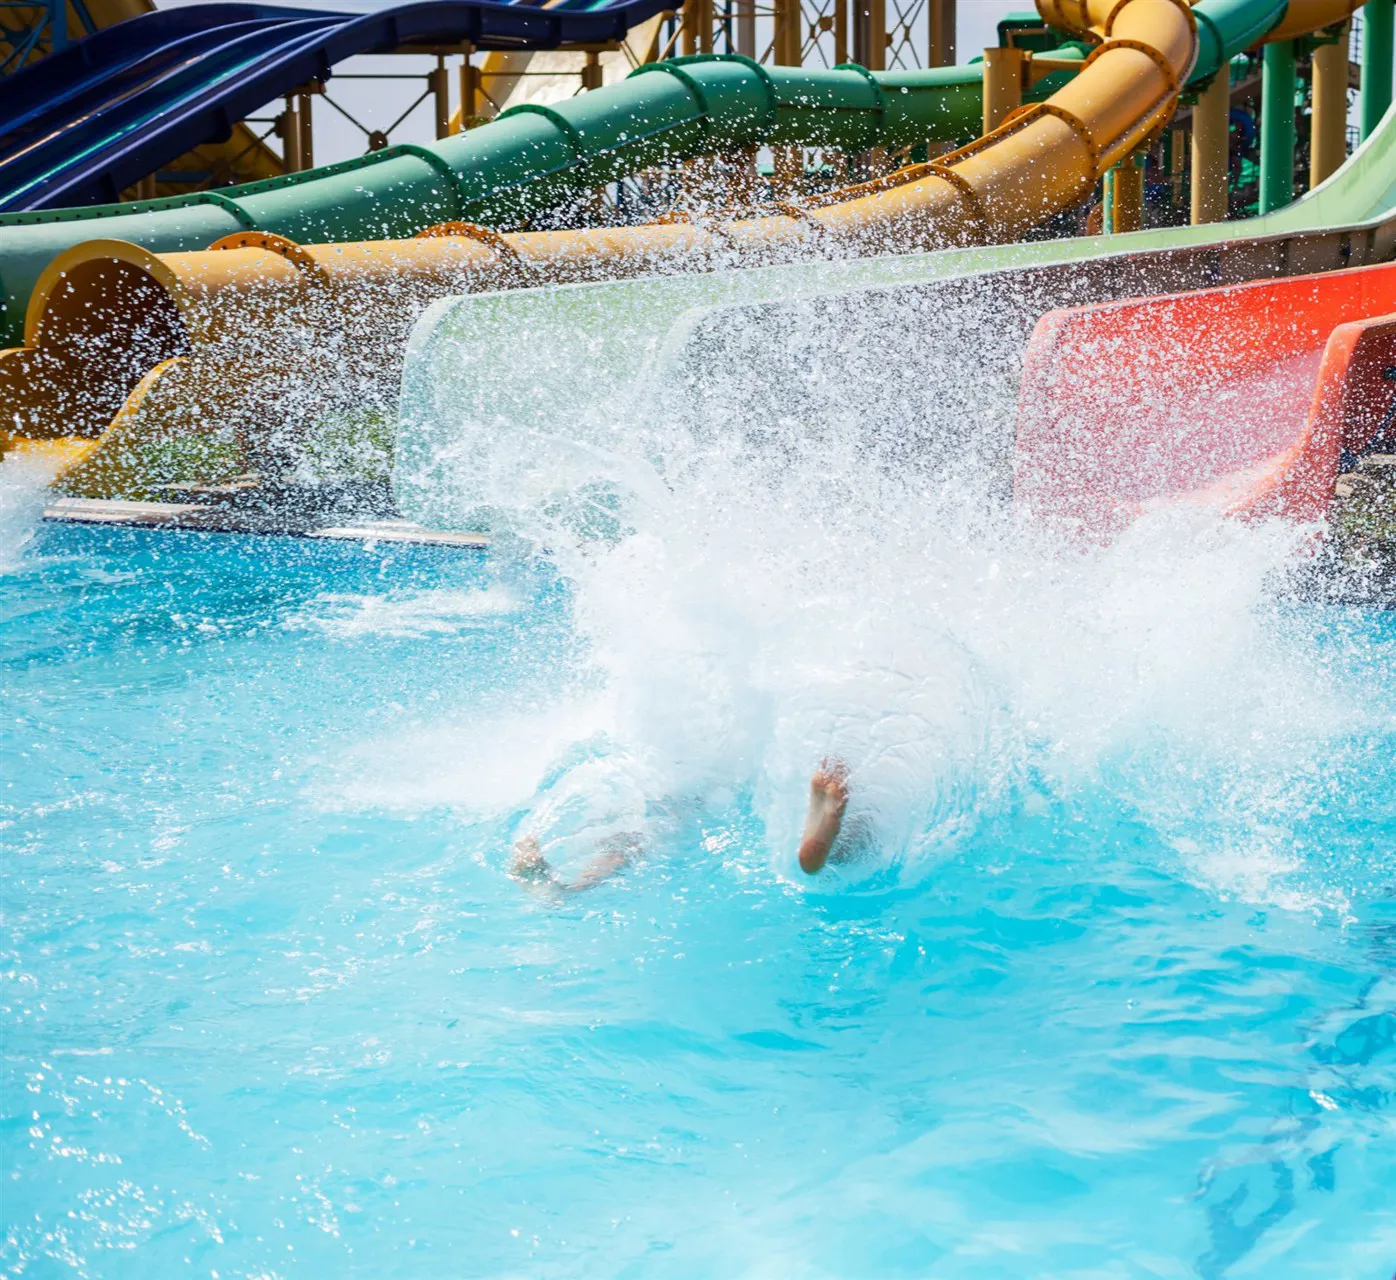 Water slides at a water park